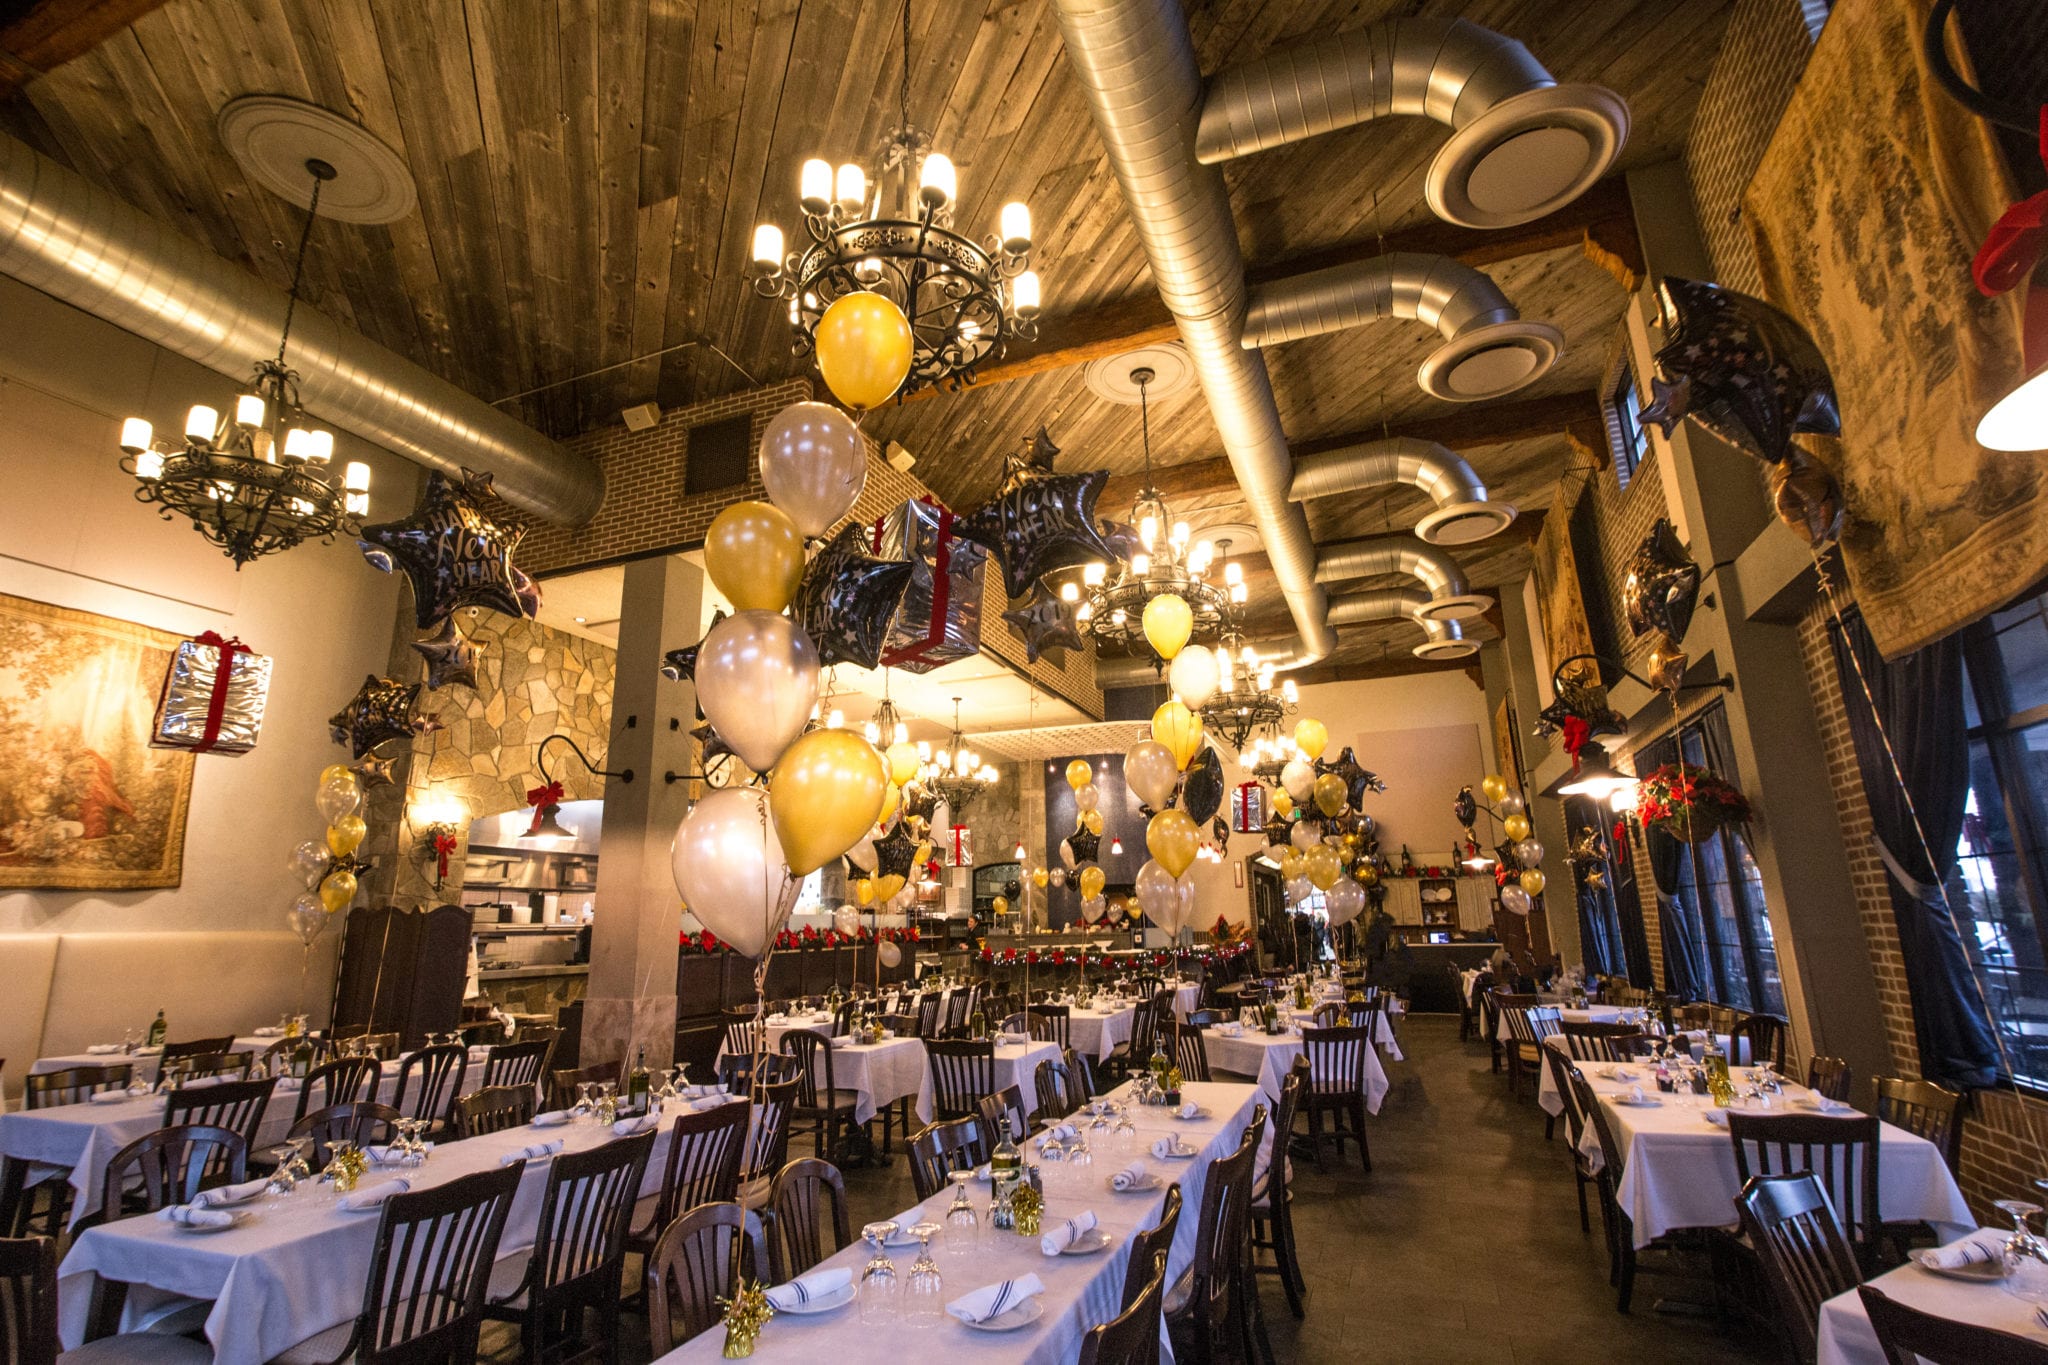 Celebrate New Year’s Eve at il Vecchio Cafe